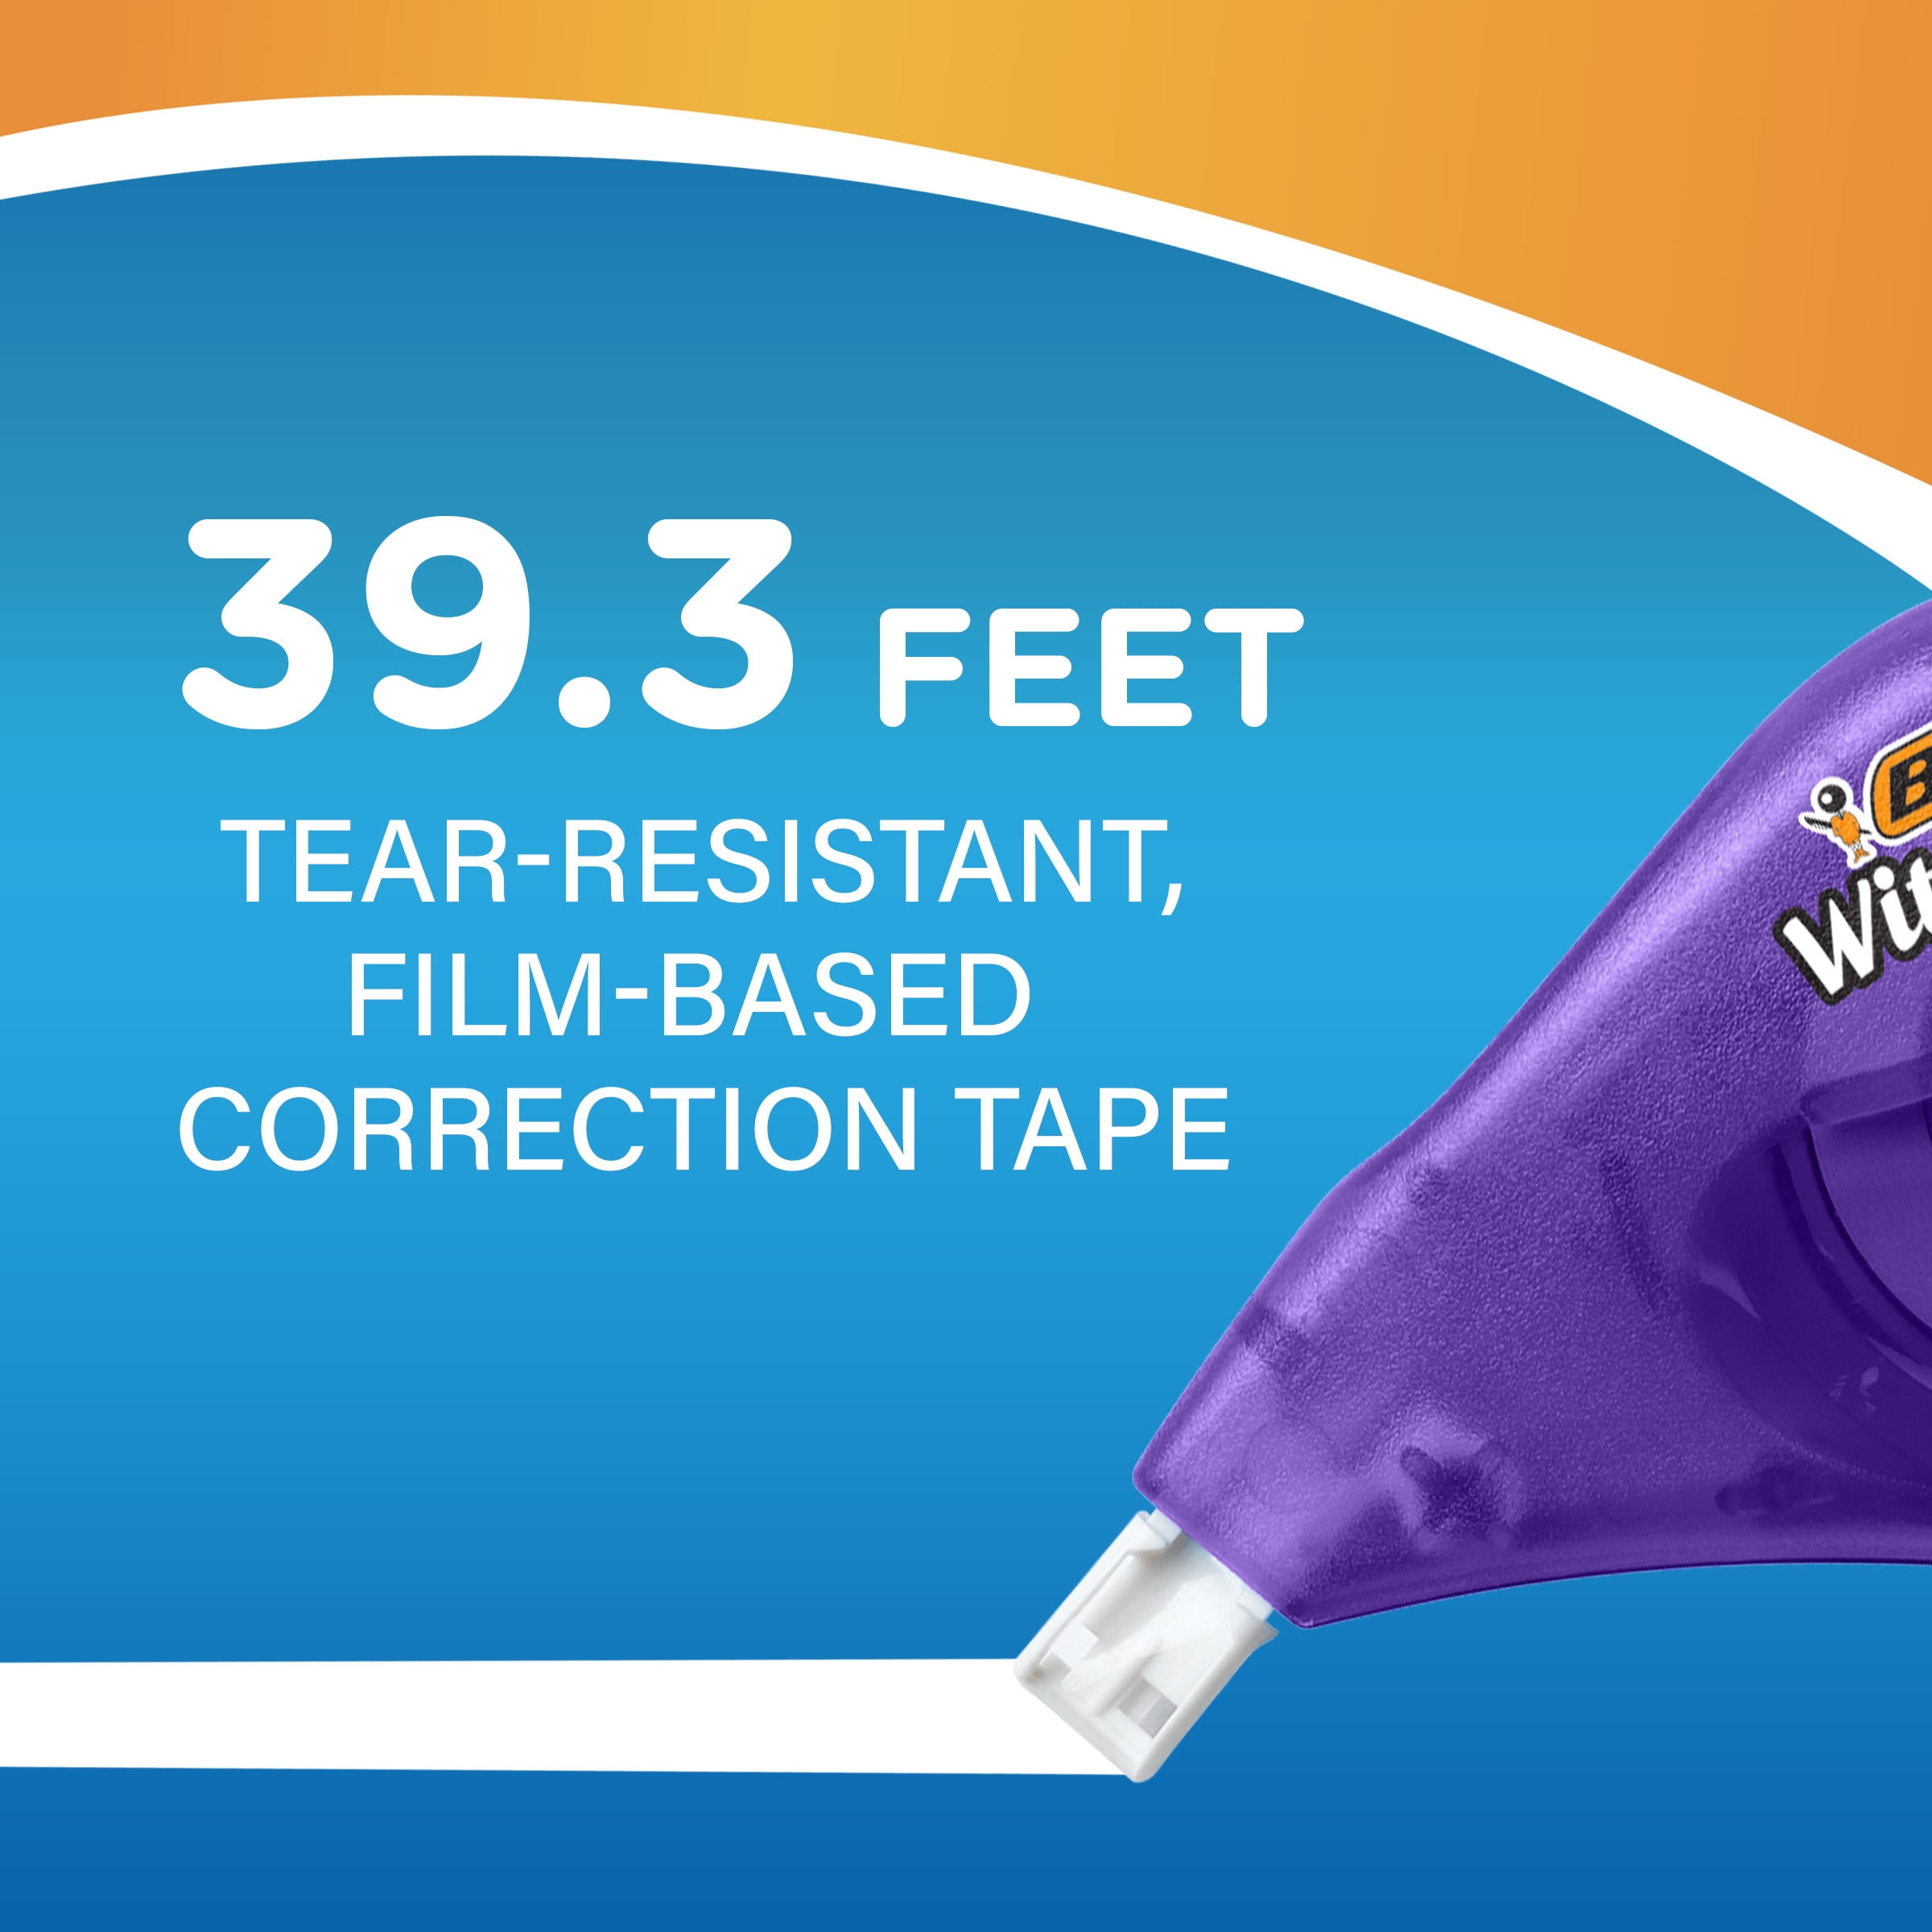 BIC Wite-Out Brand EZ Correct Correction Tape, White, 6 Count, 1